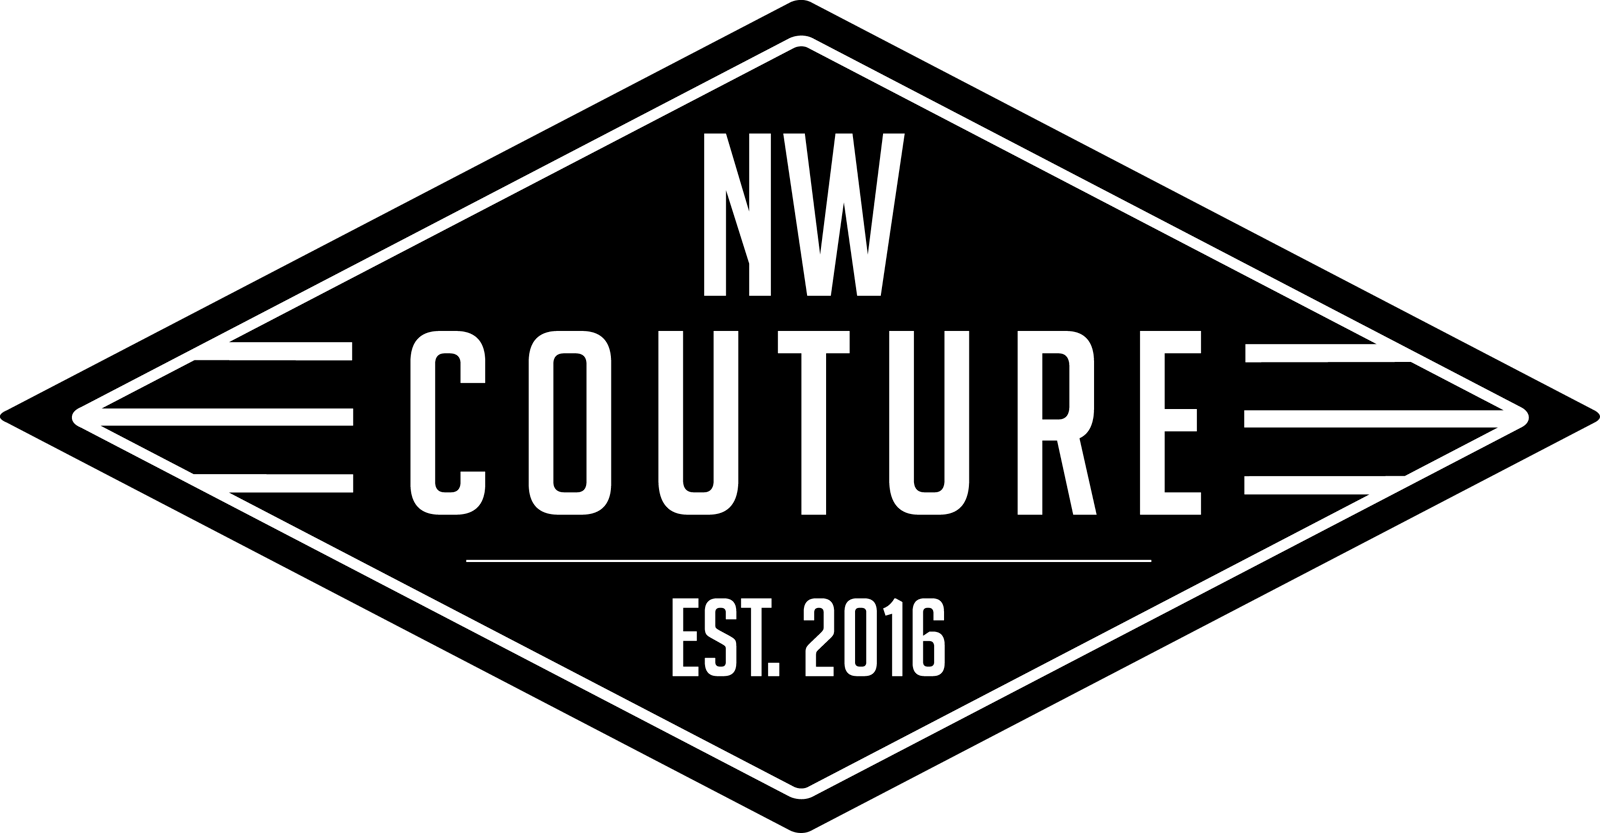 NW Couture